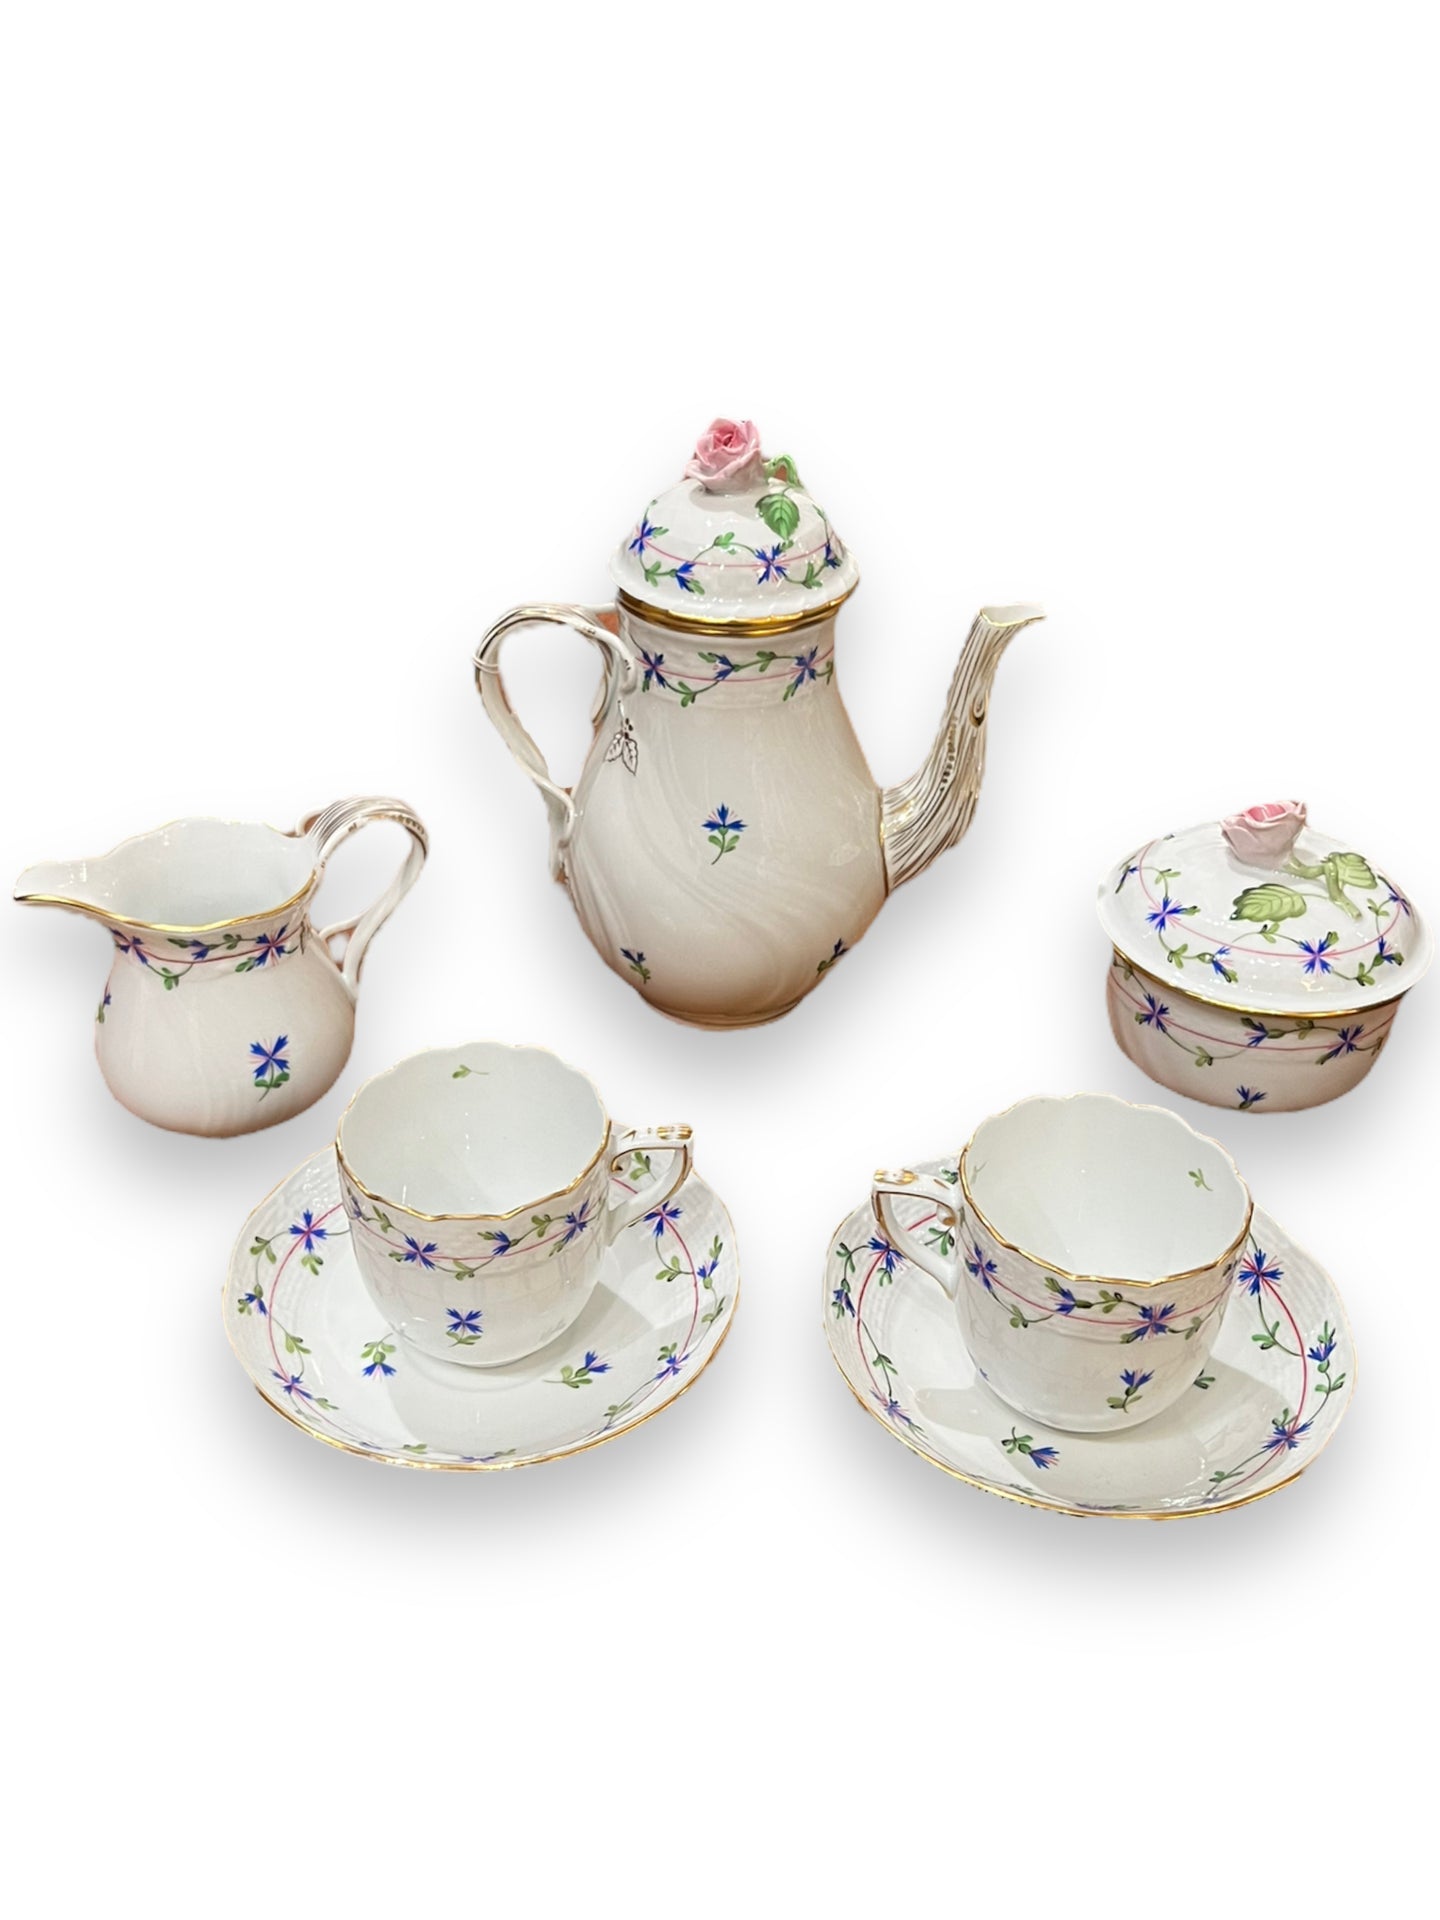 9 Piece Herend Hungary Hand Painted Tea Set - DeFrenS